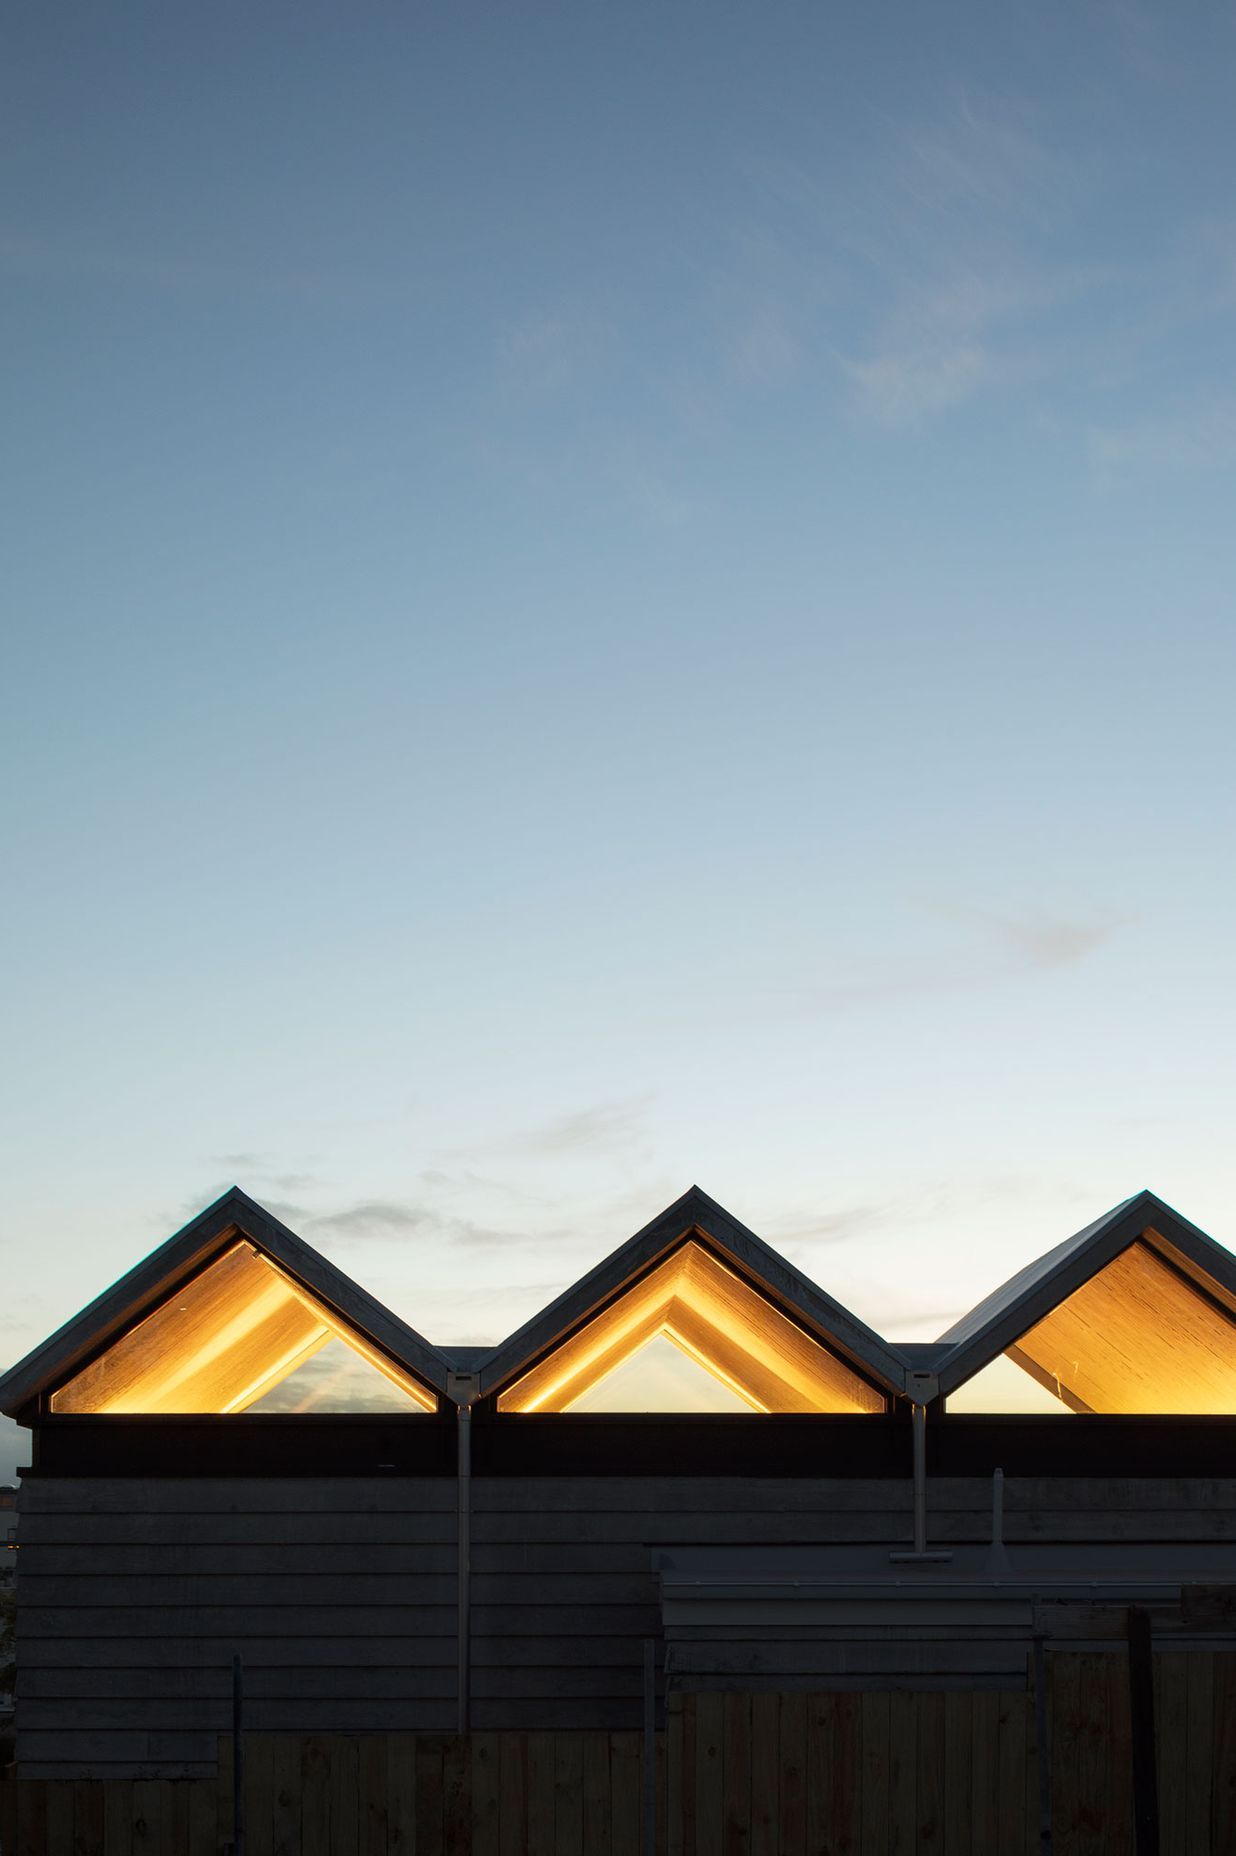 At night the pleated roof is underlit to dramatic effect and framing the setting sun .